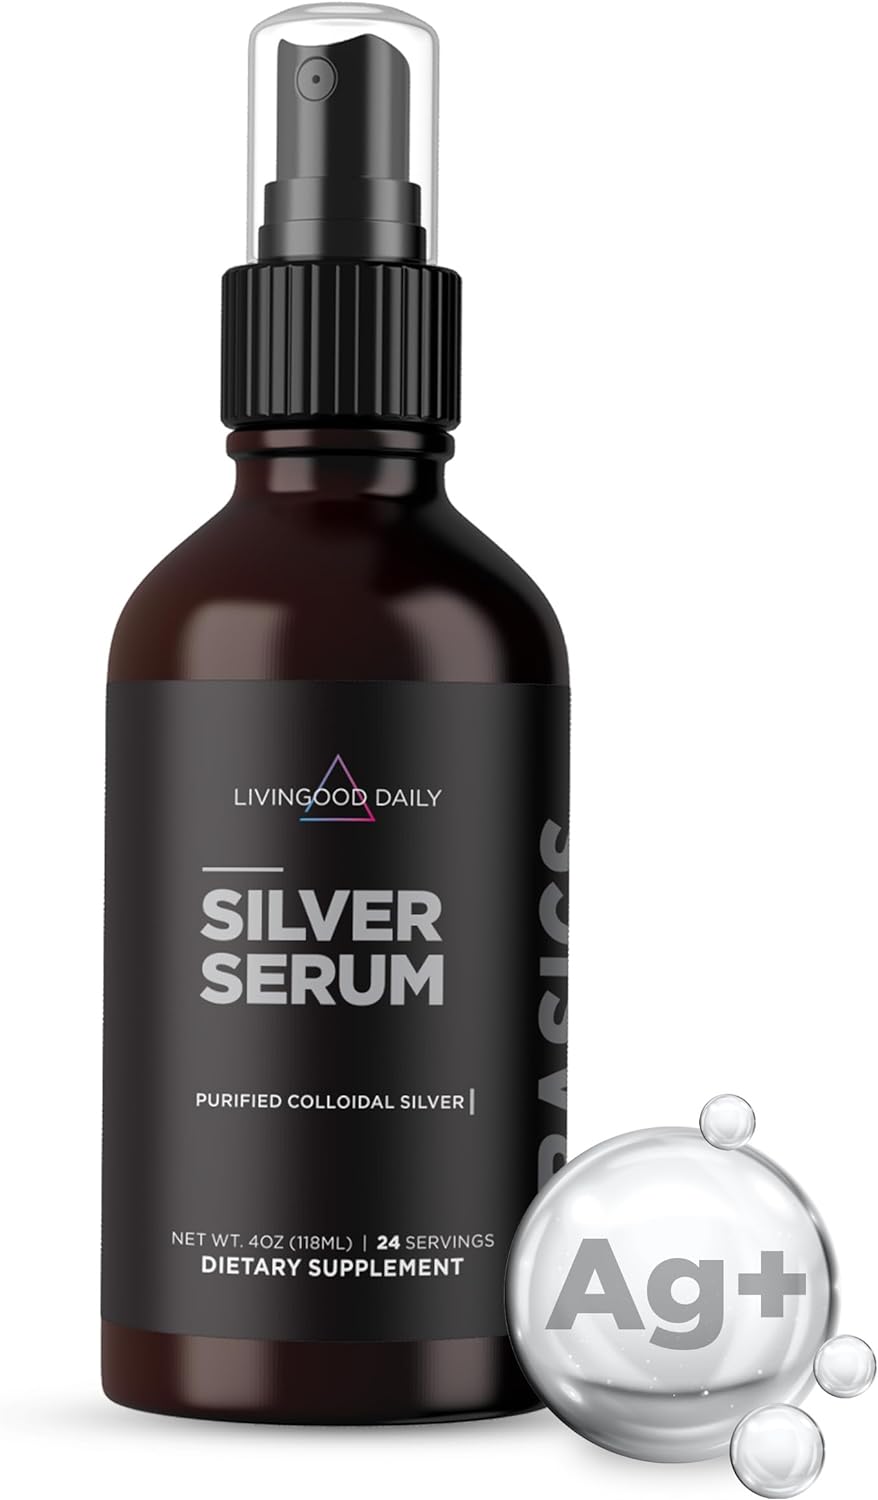 Livingood Daily Colloidal Silver Liquid Spray, Silver Serum (4 Fl Oz) - 10 PPM Colloidal Silver Spray for Eyes, Mouth, Ears, Nose & Skin - Immune Support Supplement for Urinary Health - Non-GMO, Vegan